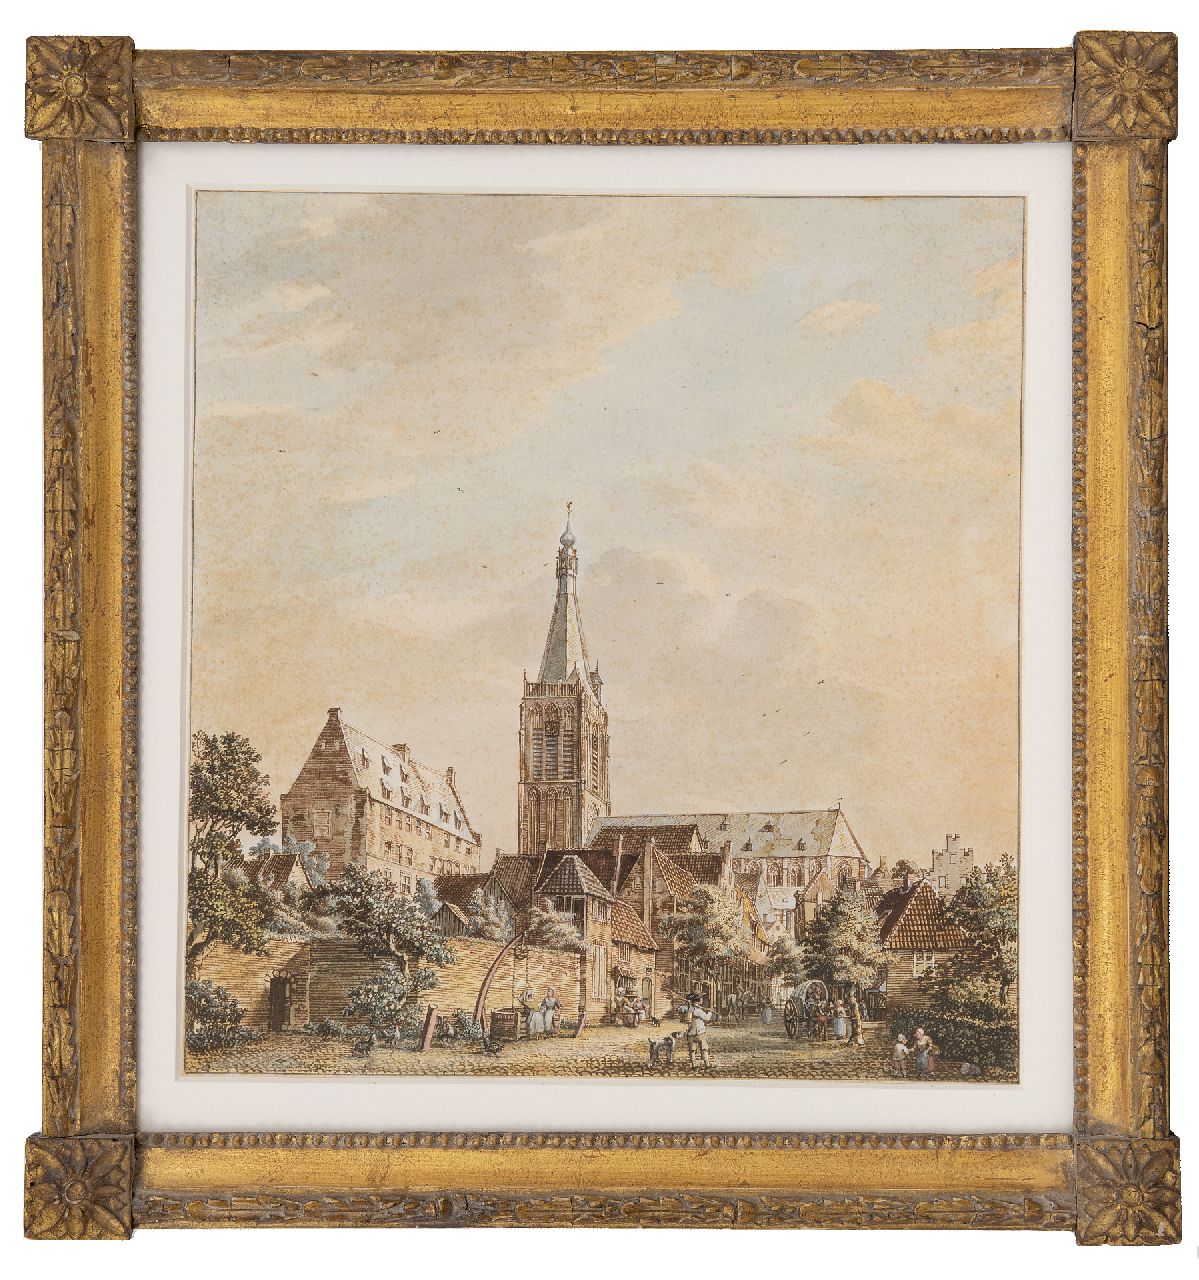 Beijer J. de | Jan de Beijer | Watercolours and drawings offered for sale | The Grote Kerk and the Klooster in Doesburg, pen, ink and watercolour on paper 33.7 x 31.7 cm, signed on the reverse and dated on the reverse 10. August: 1772'